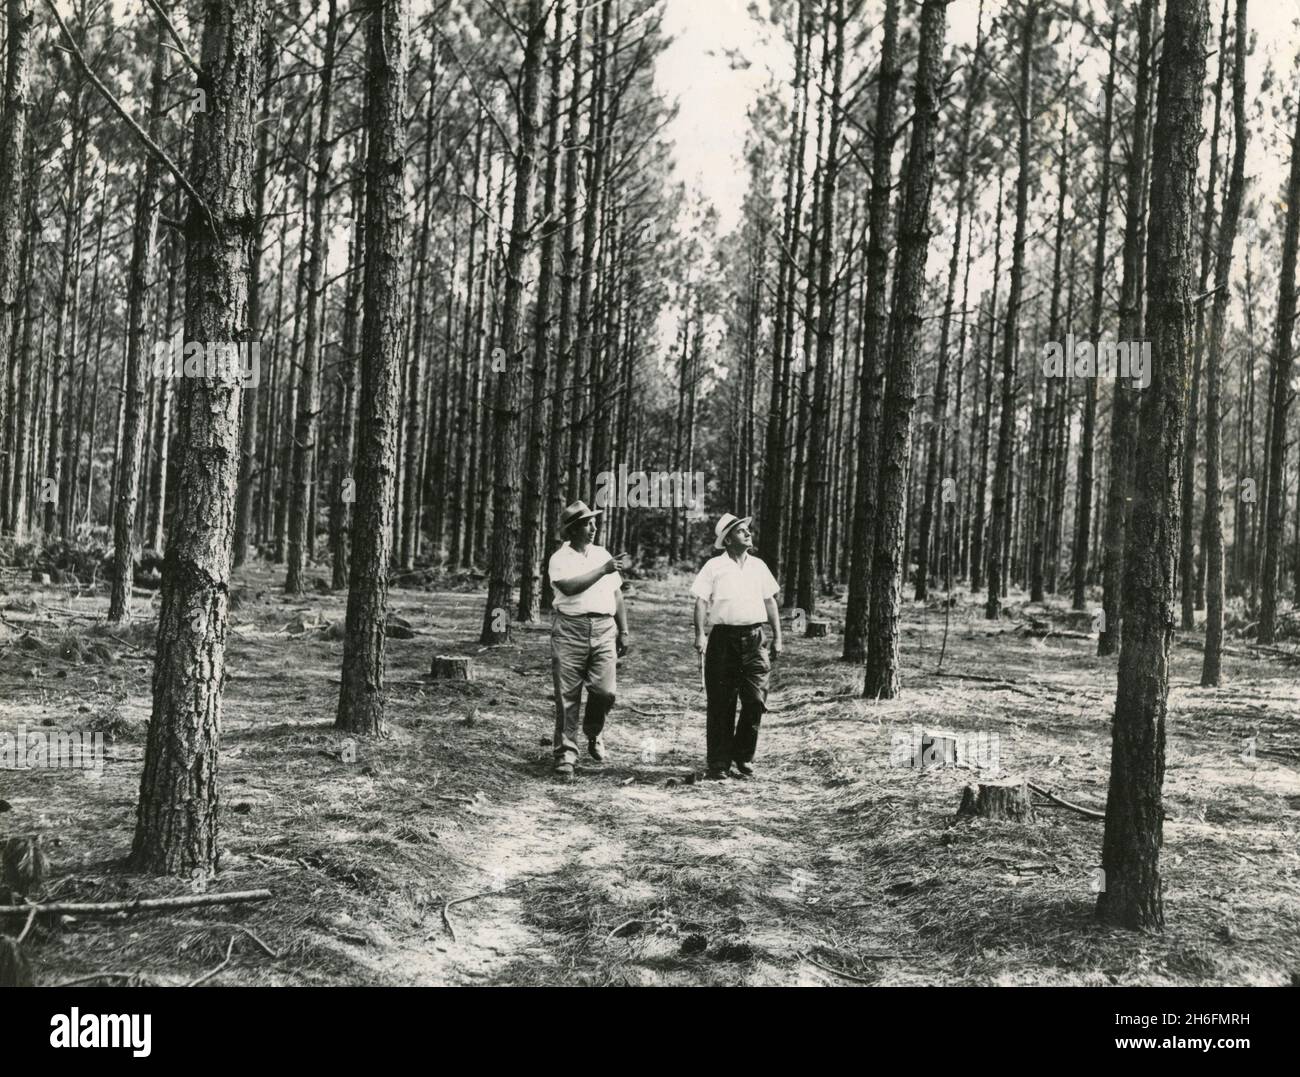 Plantation forest showing timber harvesting and thinning practices, Georgia USA 1957 Stock Photo